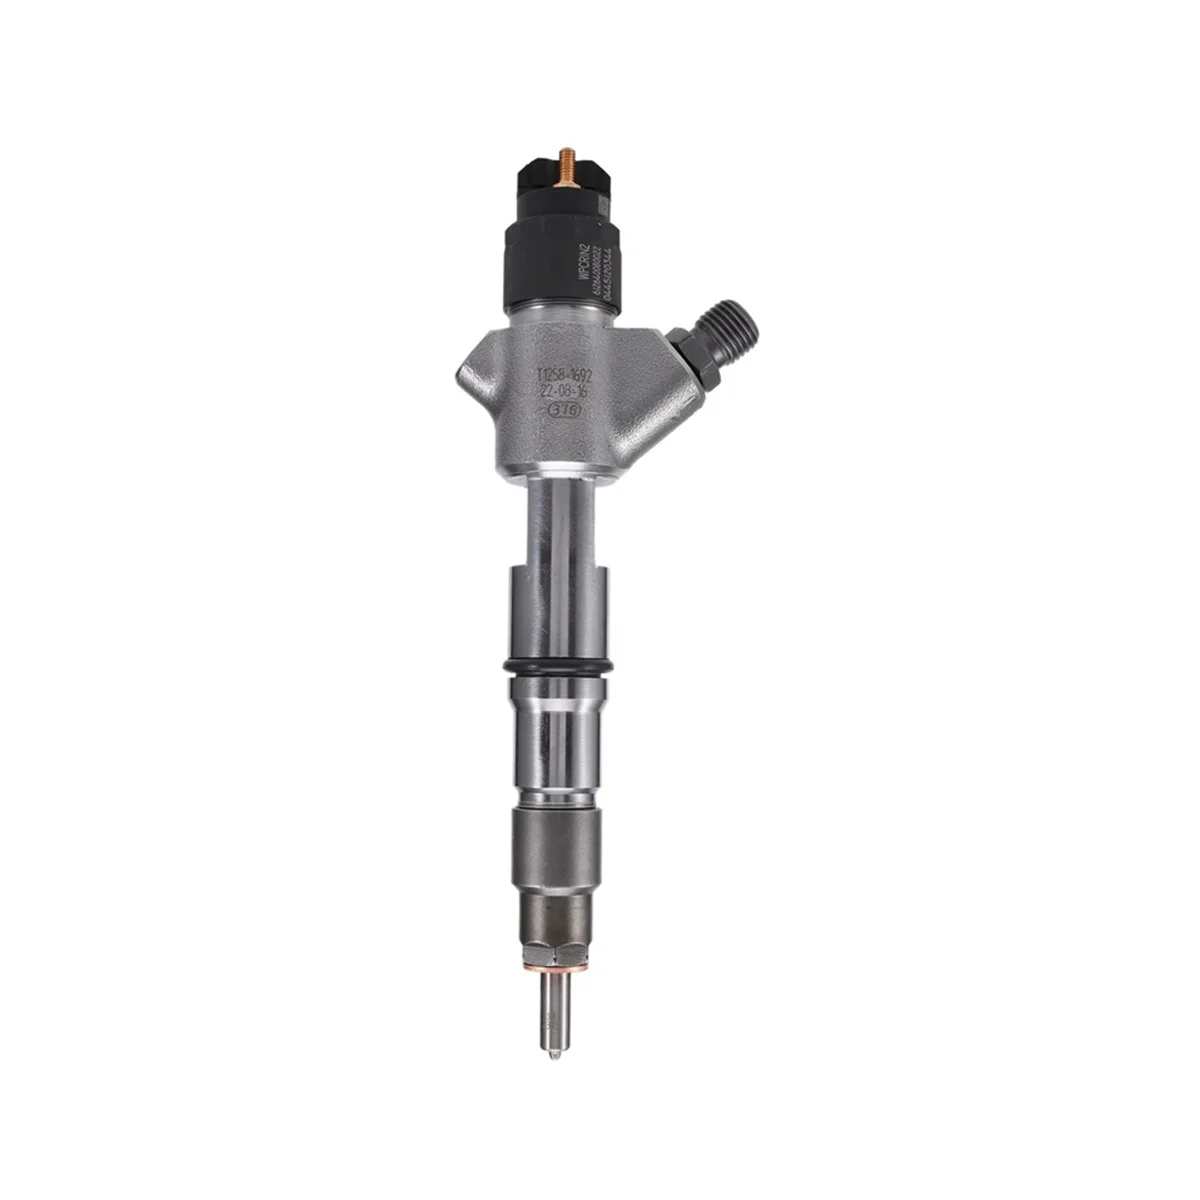 

0445120344 New Common Rail Crude Oil Fuel Injector Nozzle for Bosch for WEICHAI WD615 612640080022